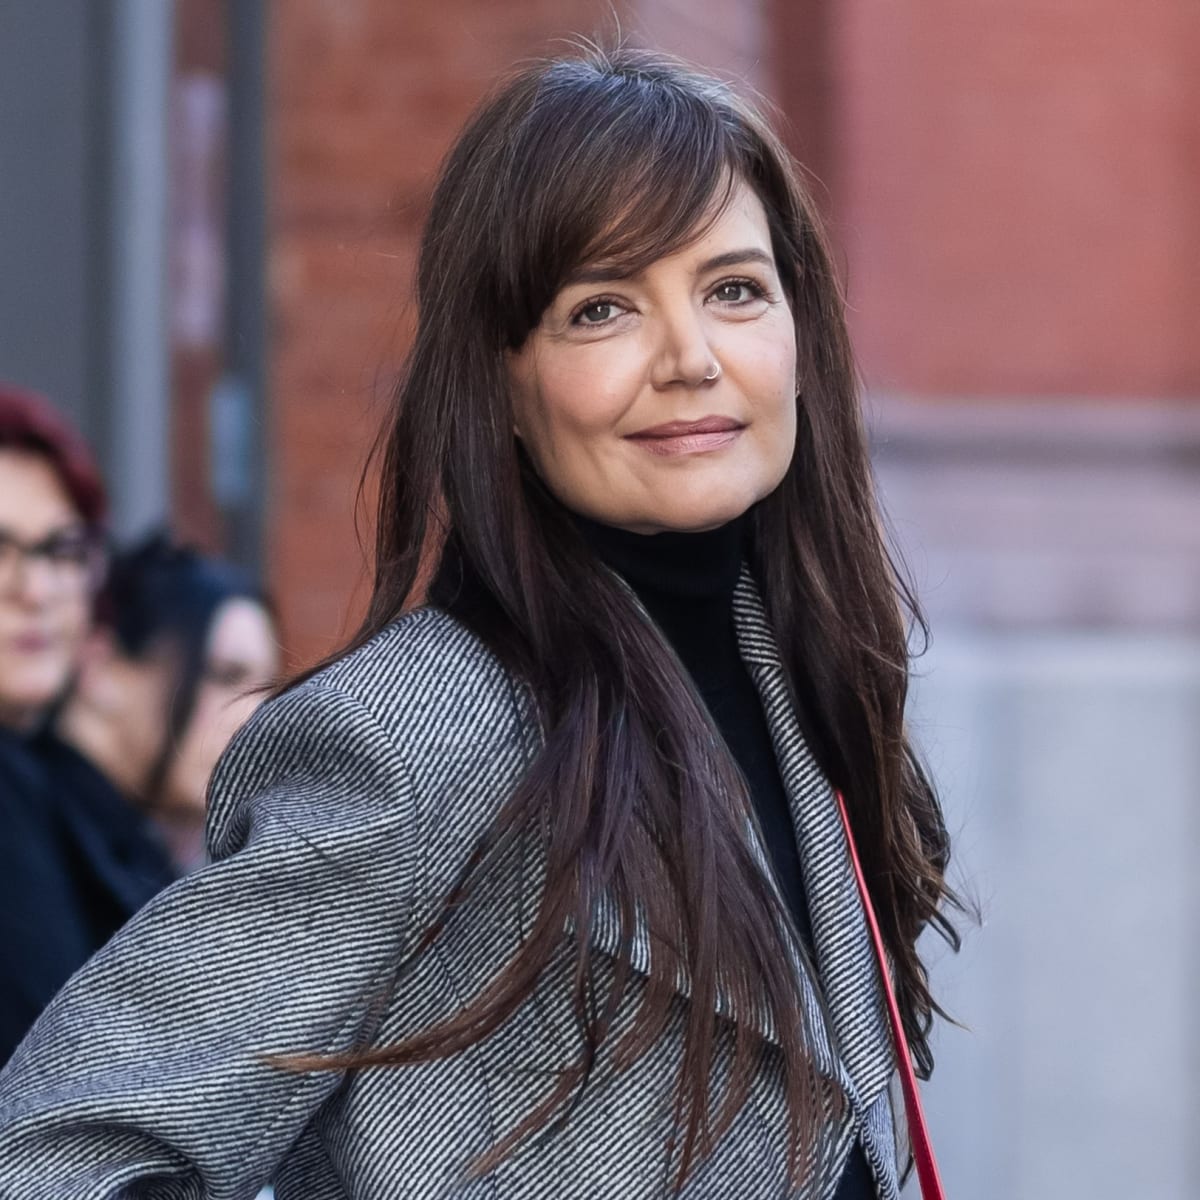 Katie Holmes' Latest Look Will Make You Want Side Bangs and a Red Bag -  Fashionista